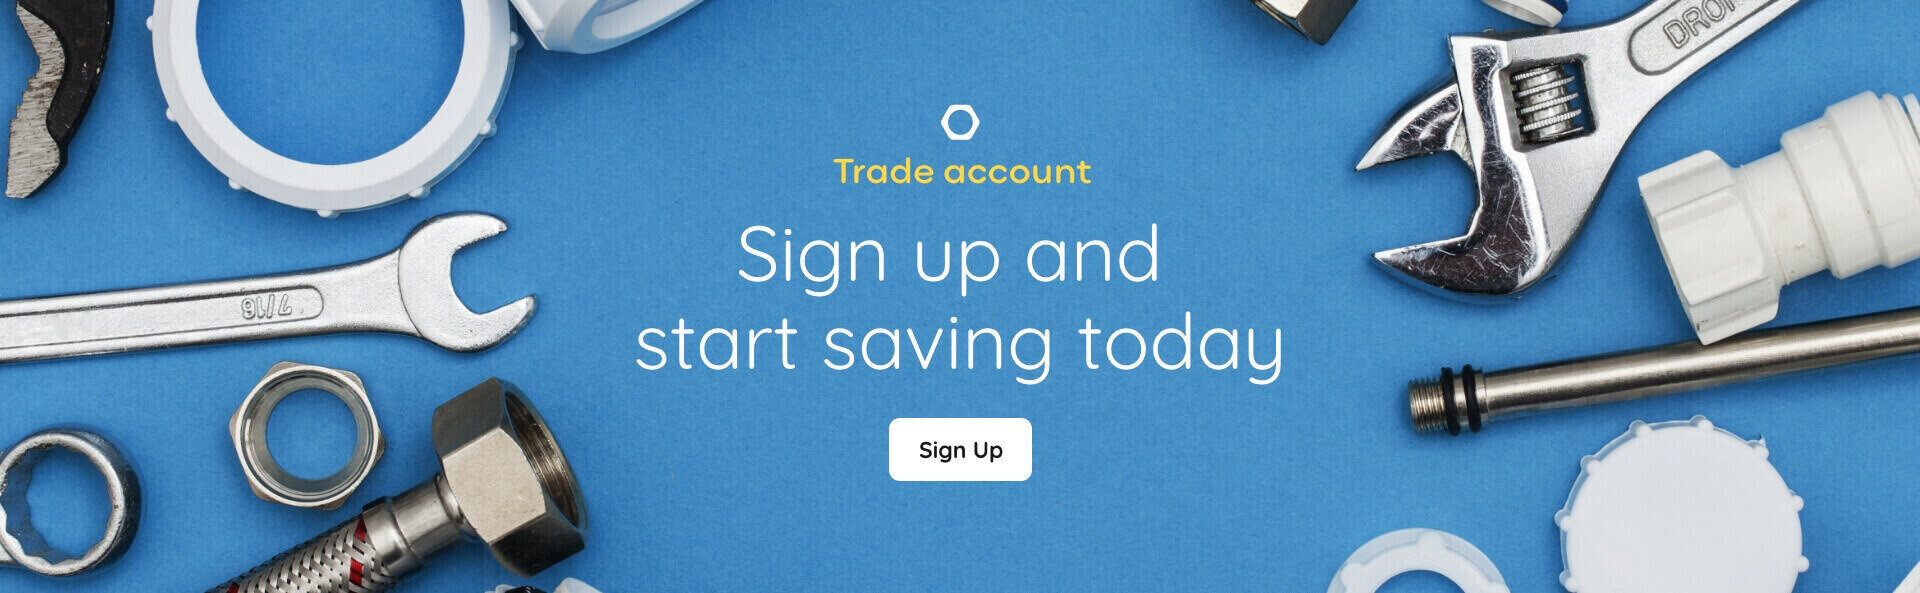 Trade Sign Up